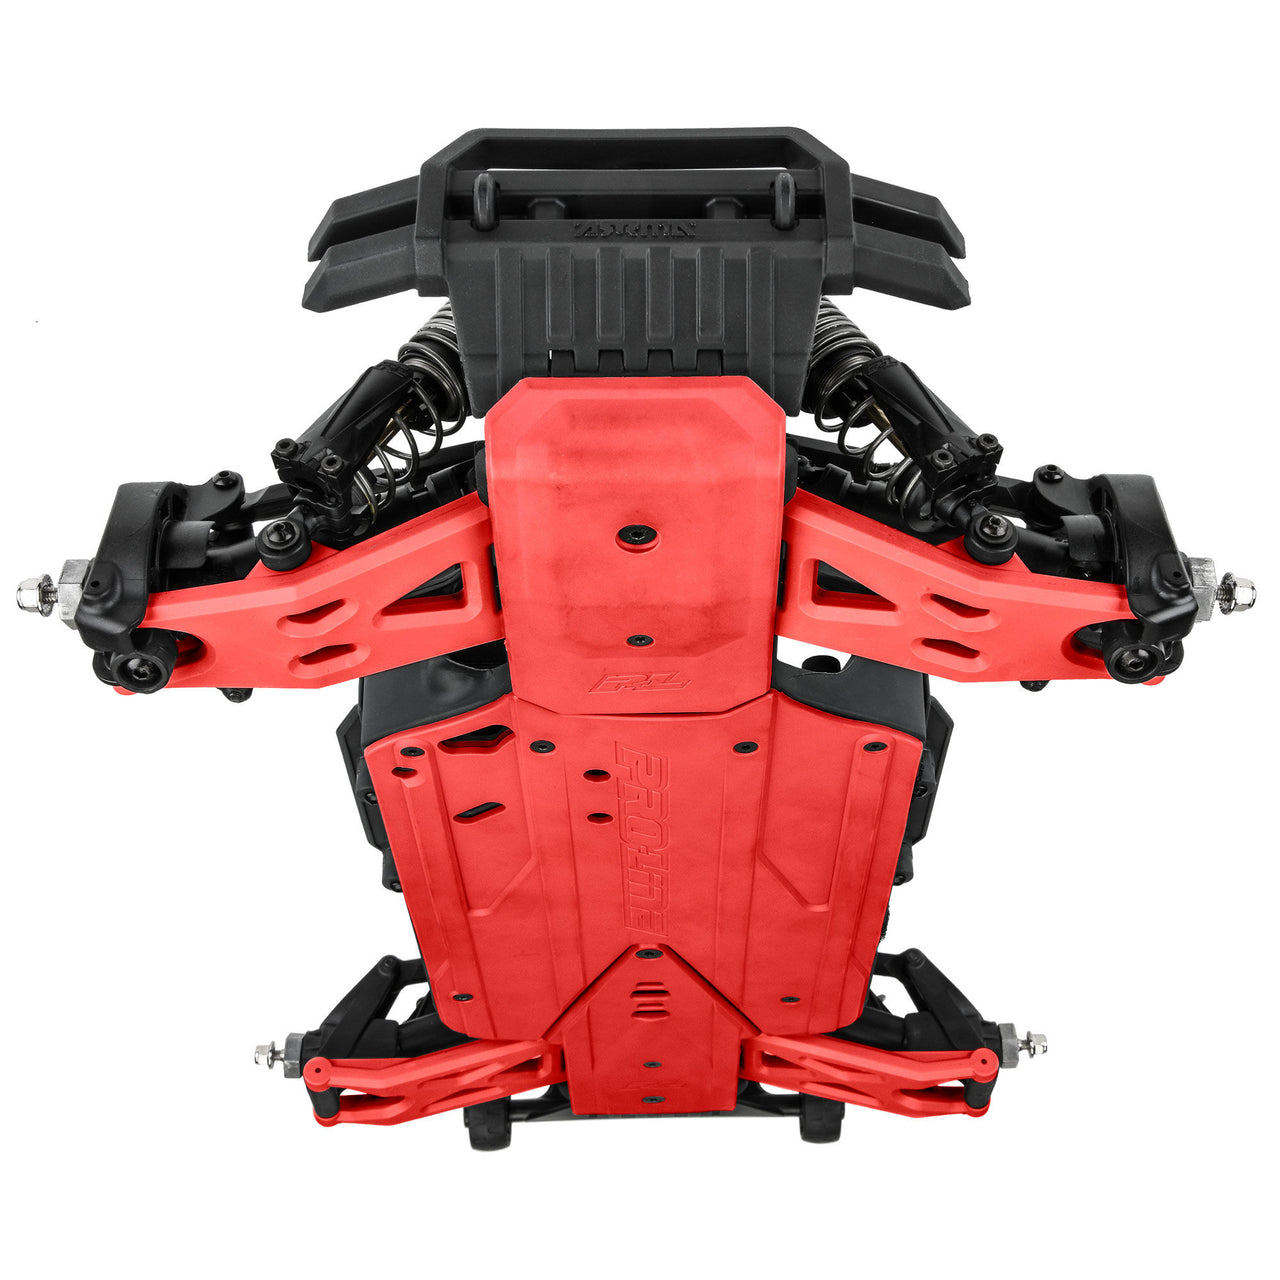 PRO639507 Bash Armor Front/Rear Skid Plates (Red) for ARRMA 3S Vehicles